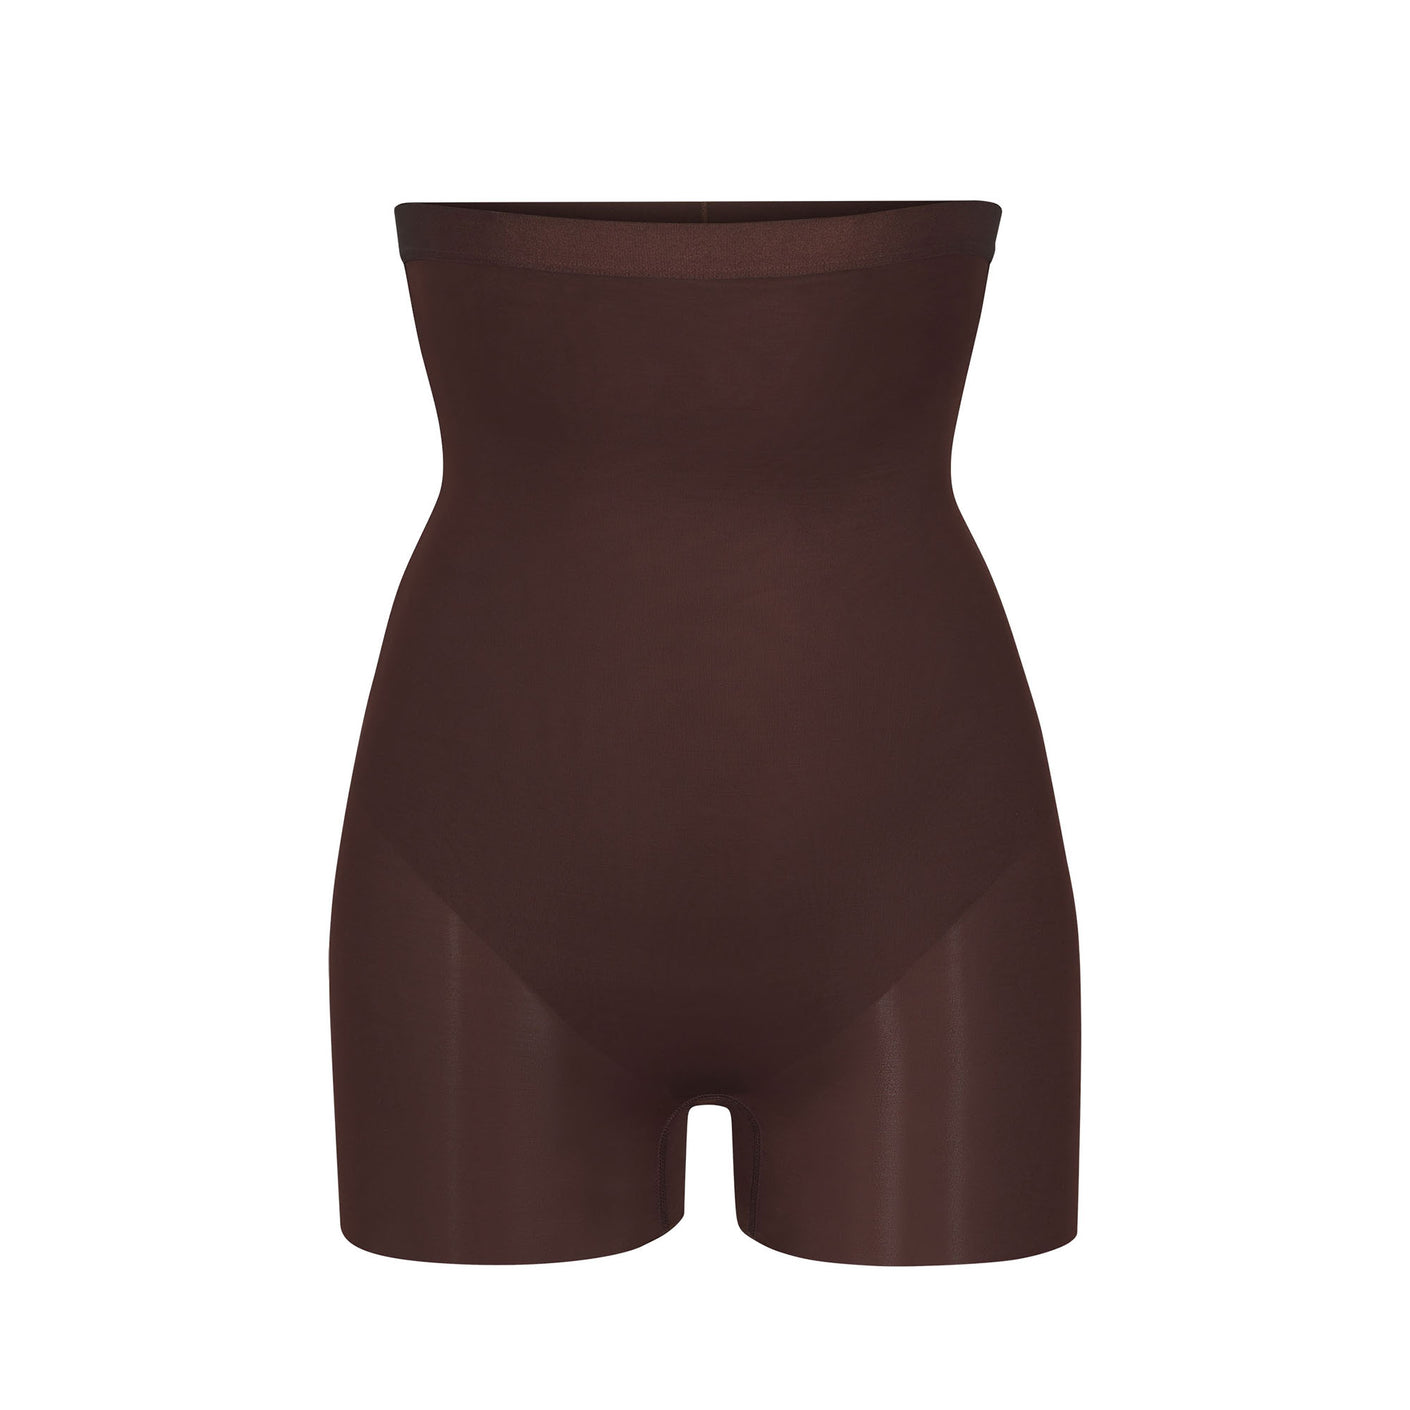 SKIMS Barely There Low Back Shorts - Cocoa